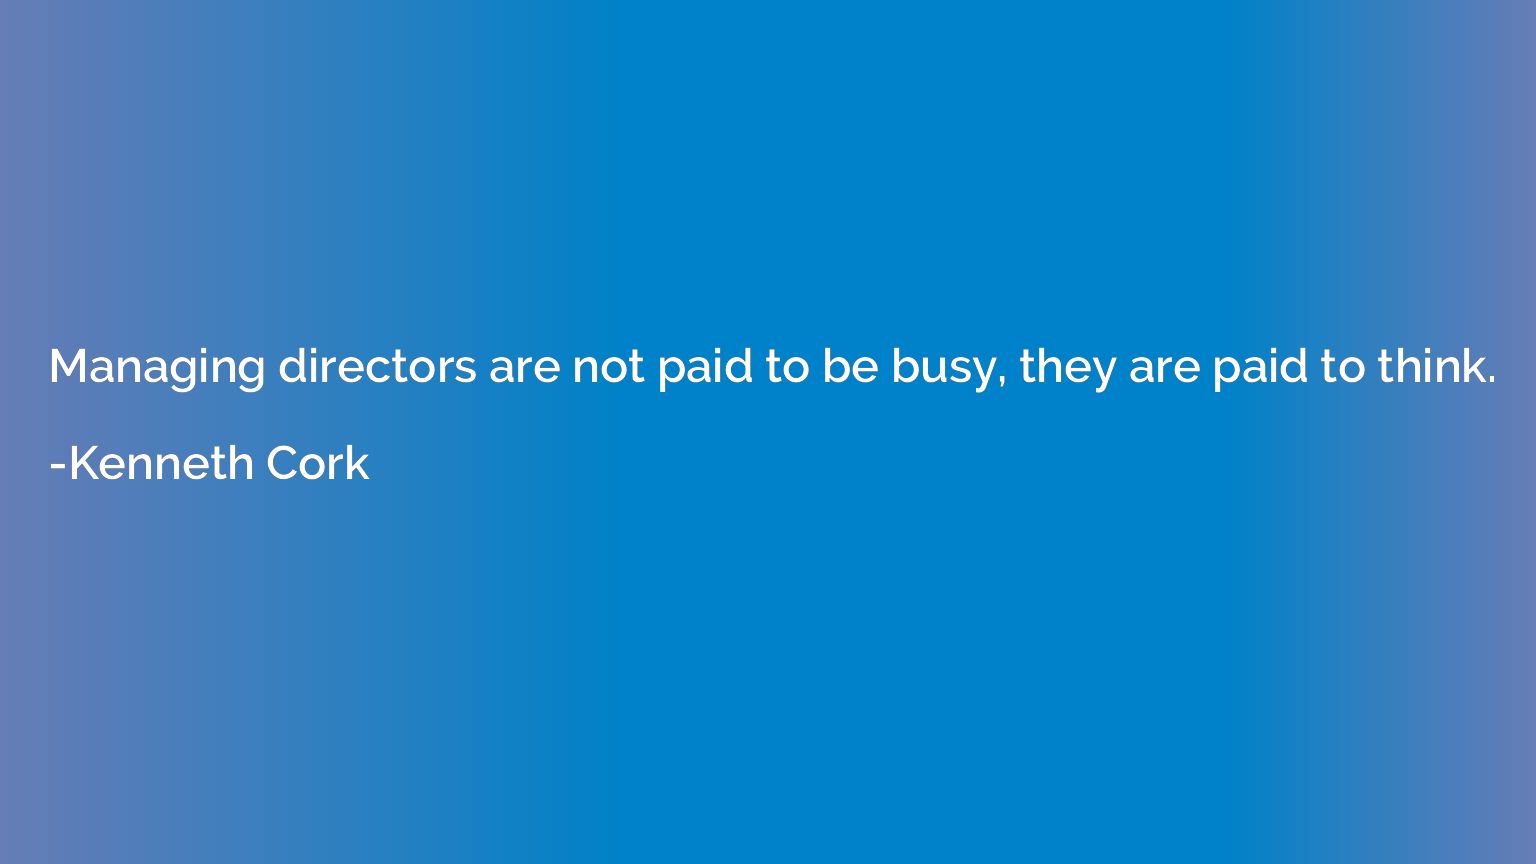 Managing directors are not paid to be busy, they are paid to